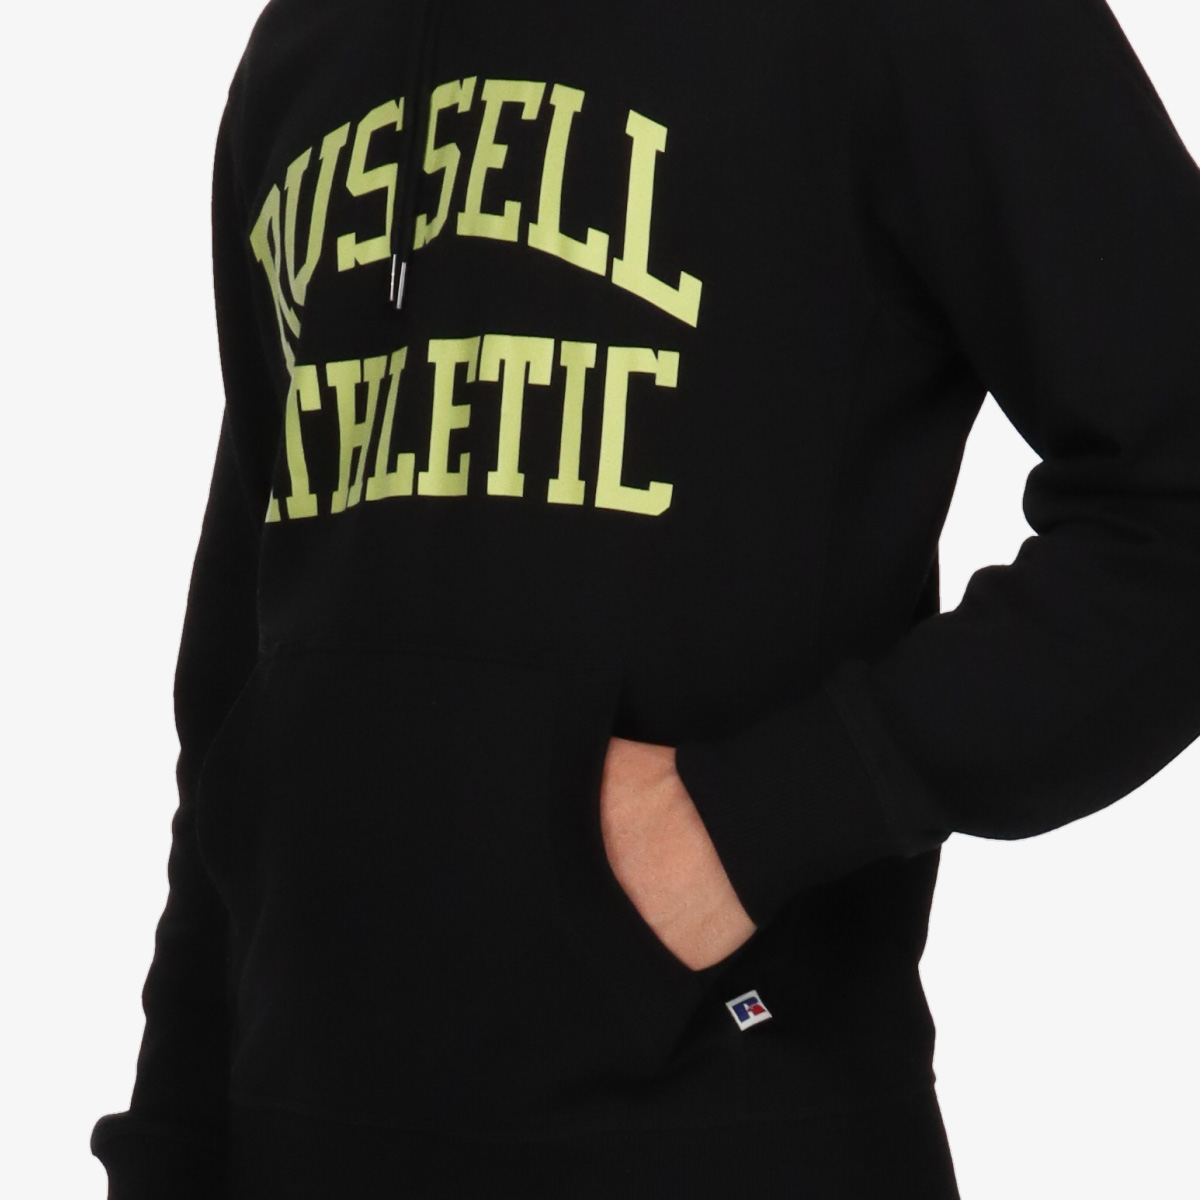 Russell Athletic KAPUCAR ICONIC HOODY SWEAT SHIRT 